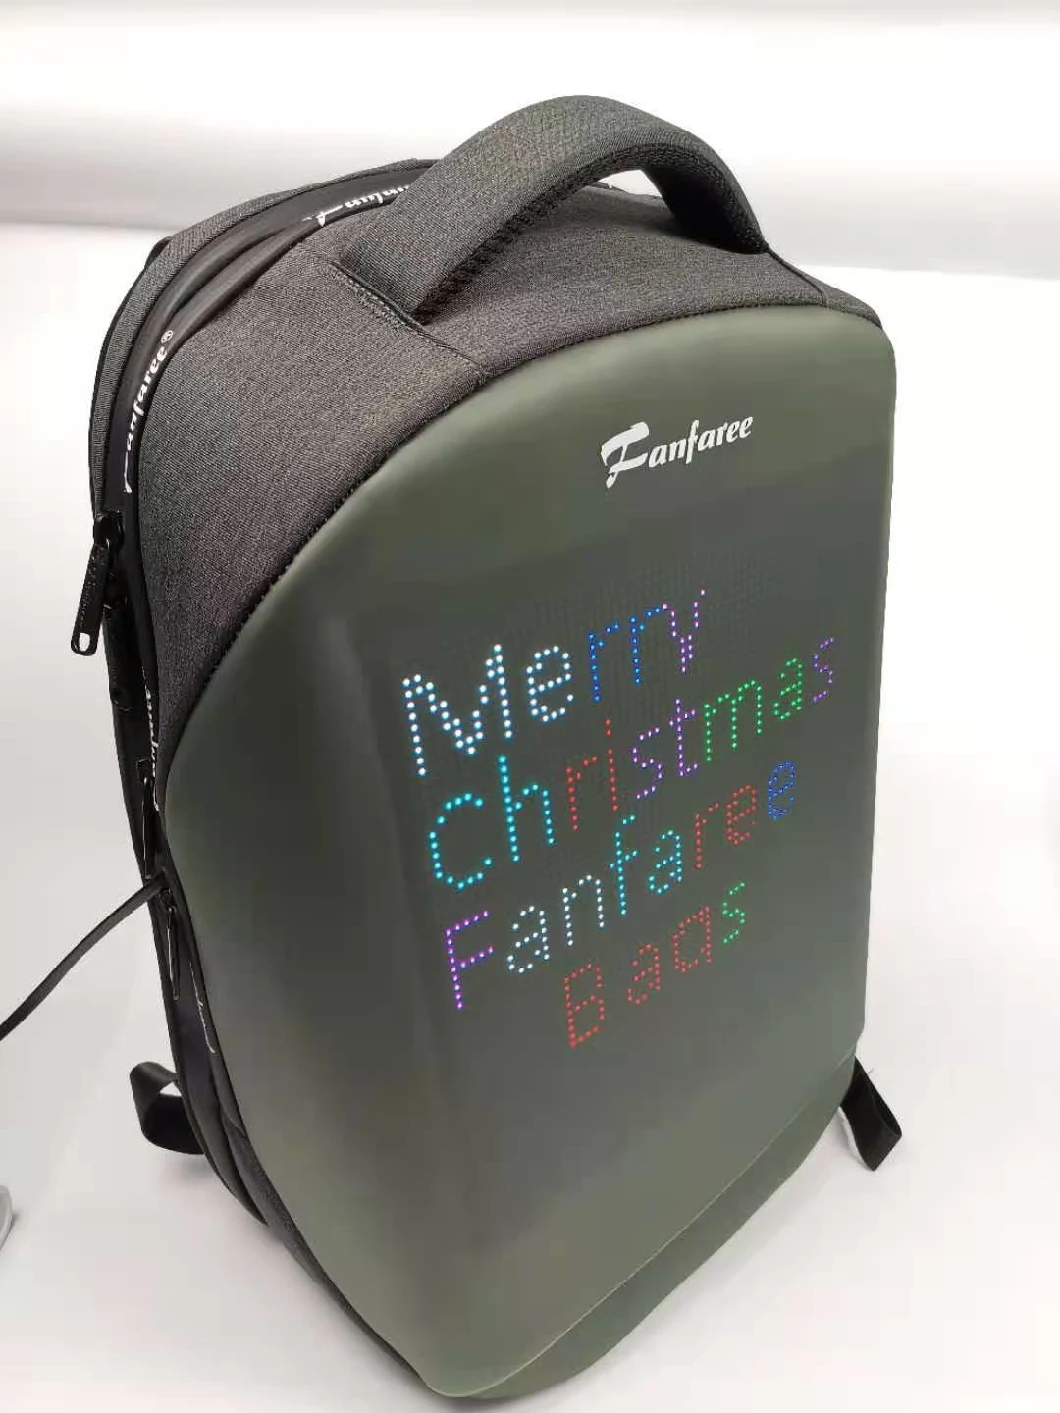 APP Control WiFi Smart Backpack with LED Screen Display for Outdoor Advertising Billboard LED Backpack